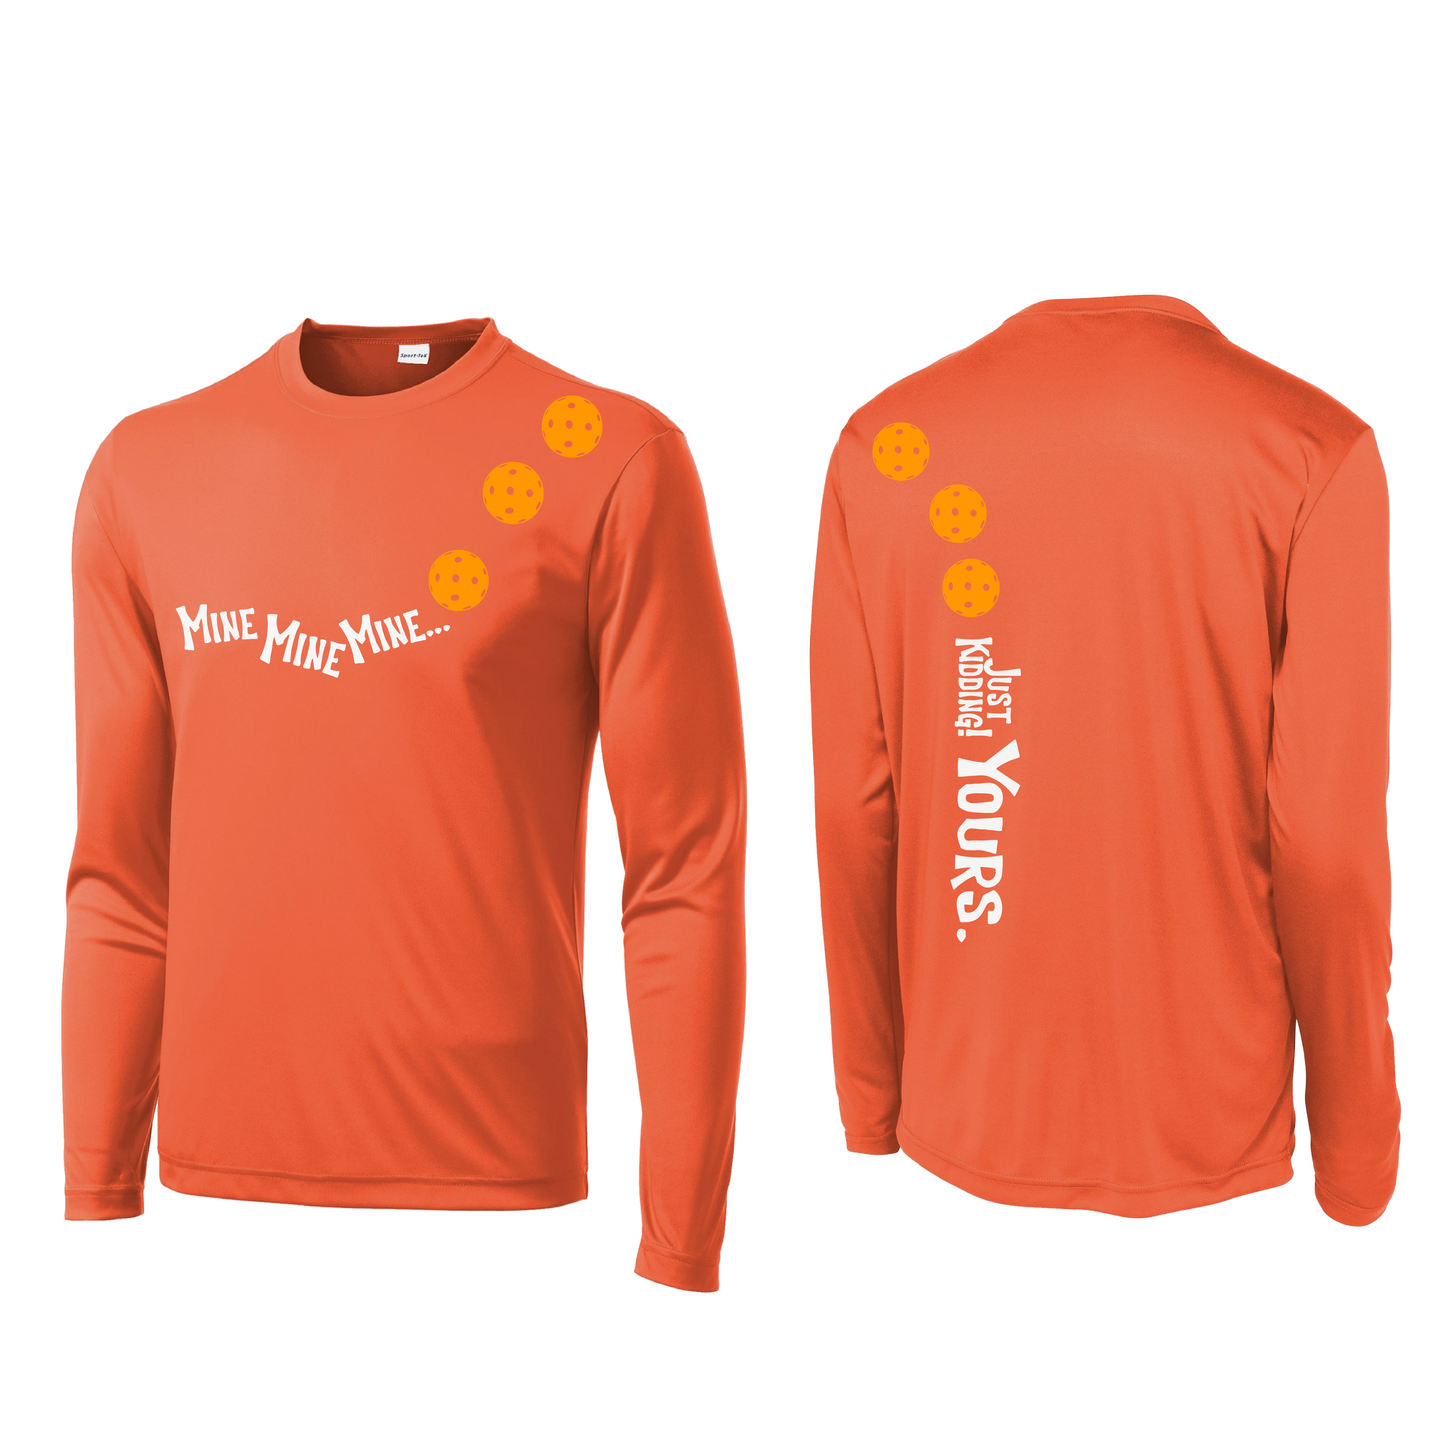 Mine JK Yours (Pickleball Colors Orange Yellow or Red) | Men's Long Sleeve Athletic Shirt | 100% Polyester